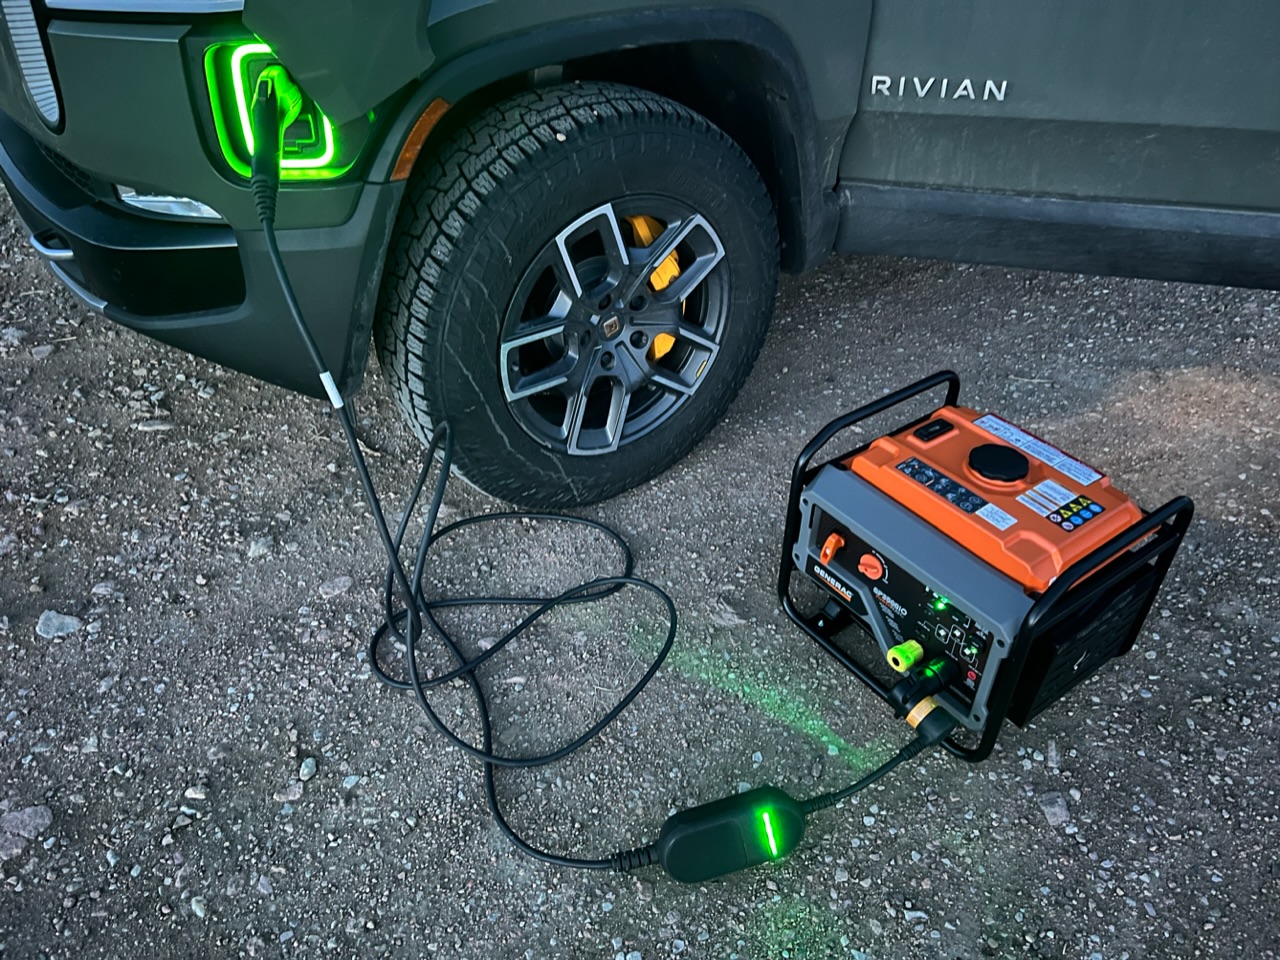 Rivian R1T R1S It's a hybrid now... R1T charged at 5.2kw with portable generator and charging adapter EF69554C-225B-47D4-8C87-ABCBF43B6ECD